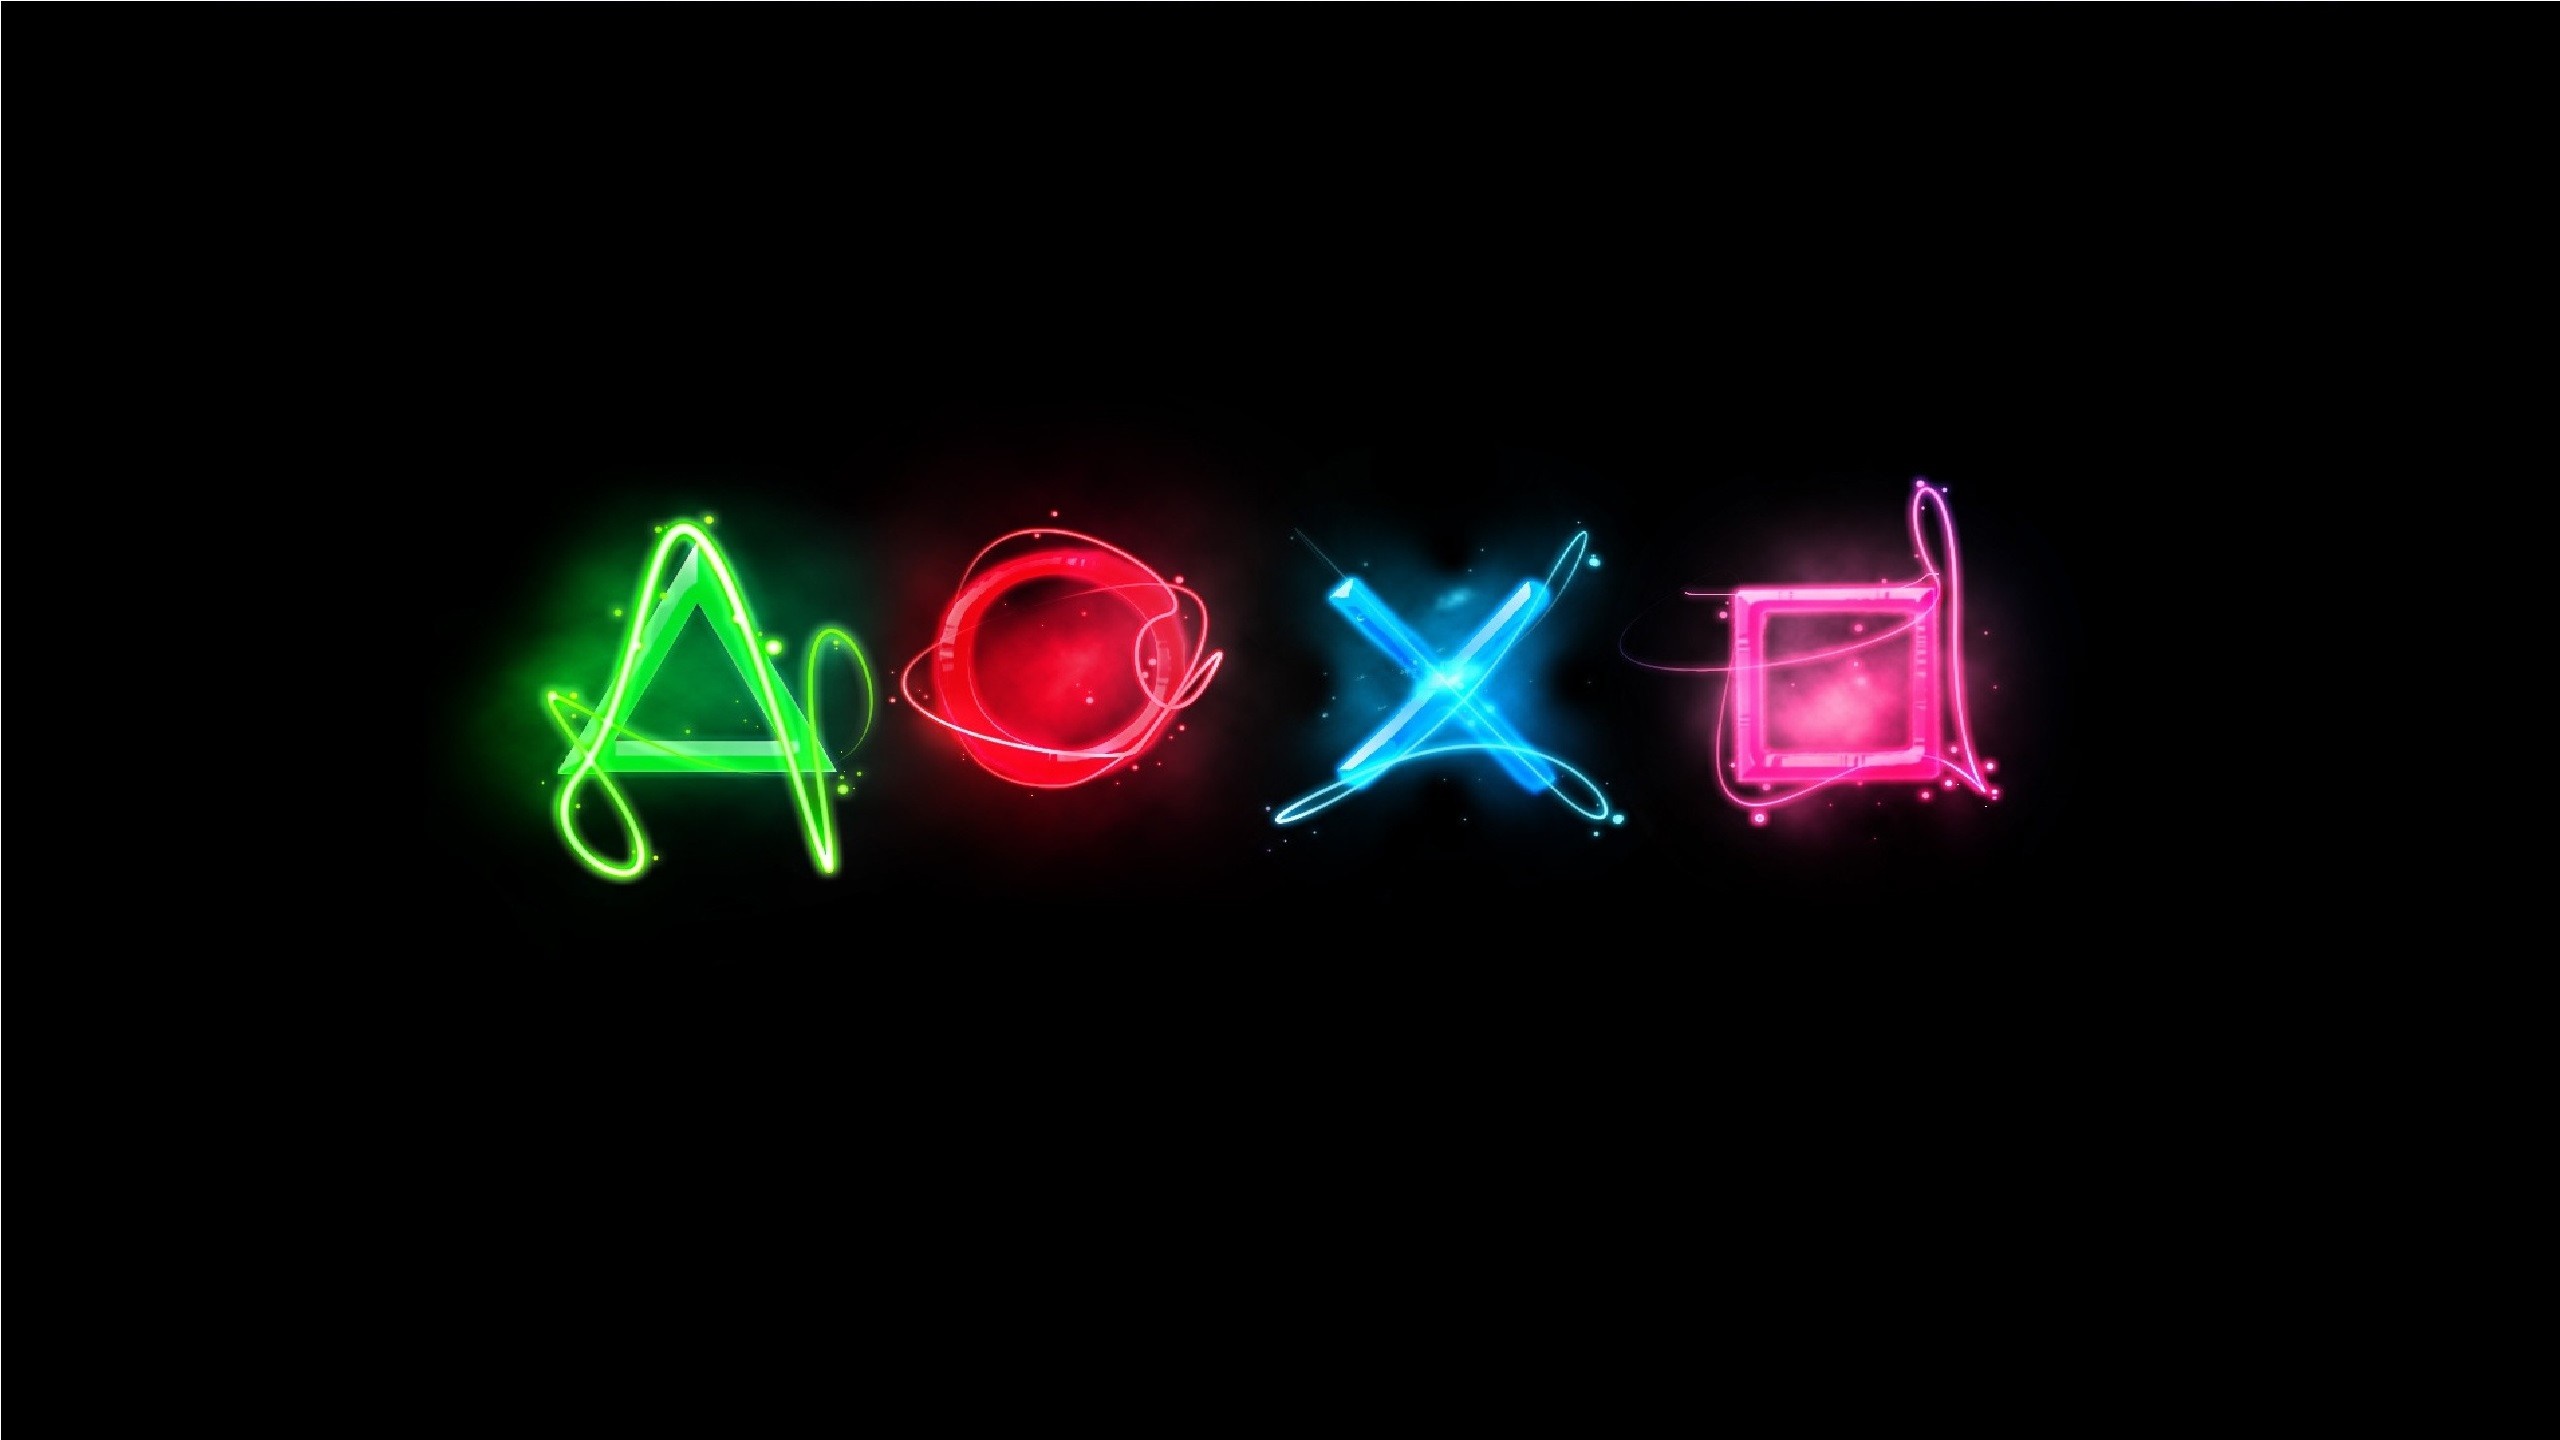 neon, text, logo, circle, PlayStation, neon sign, laser, light, shape, number, computer wallpaper, font, signage, electronic signage Gallery HD Wallpaper